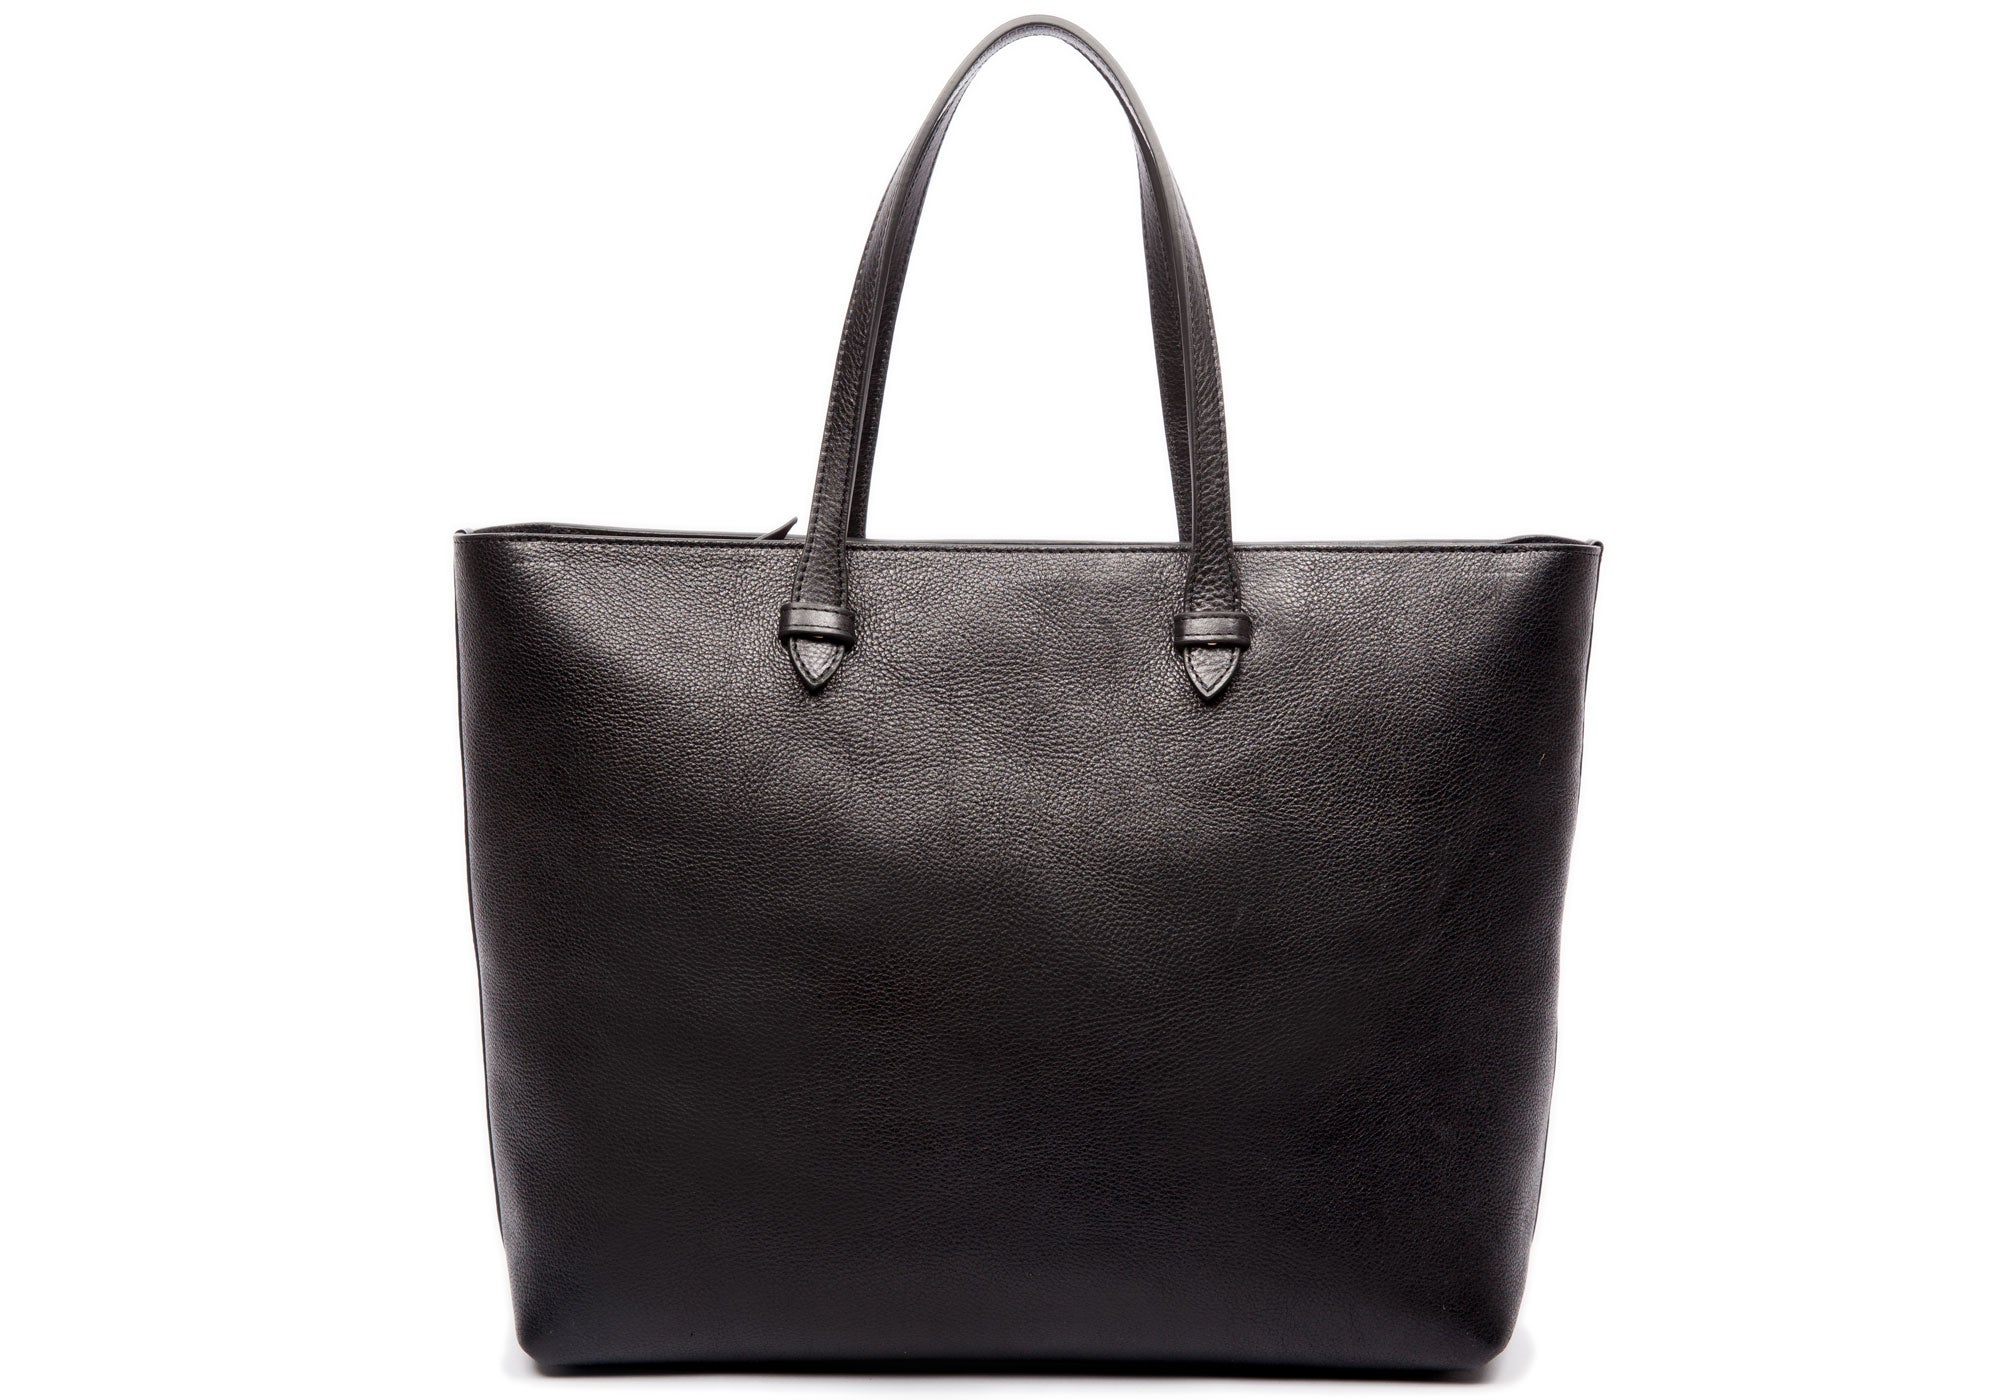 No. 12 Leather Tote Black|Front Leather View